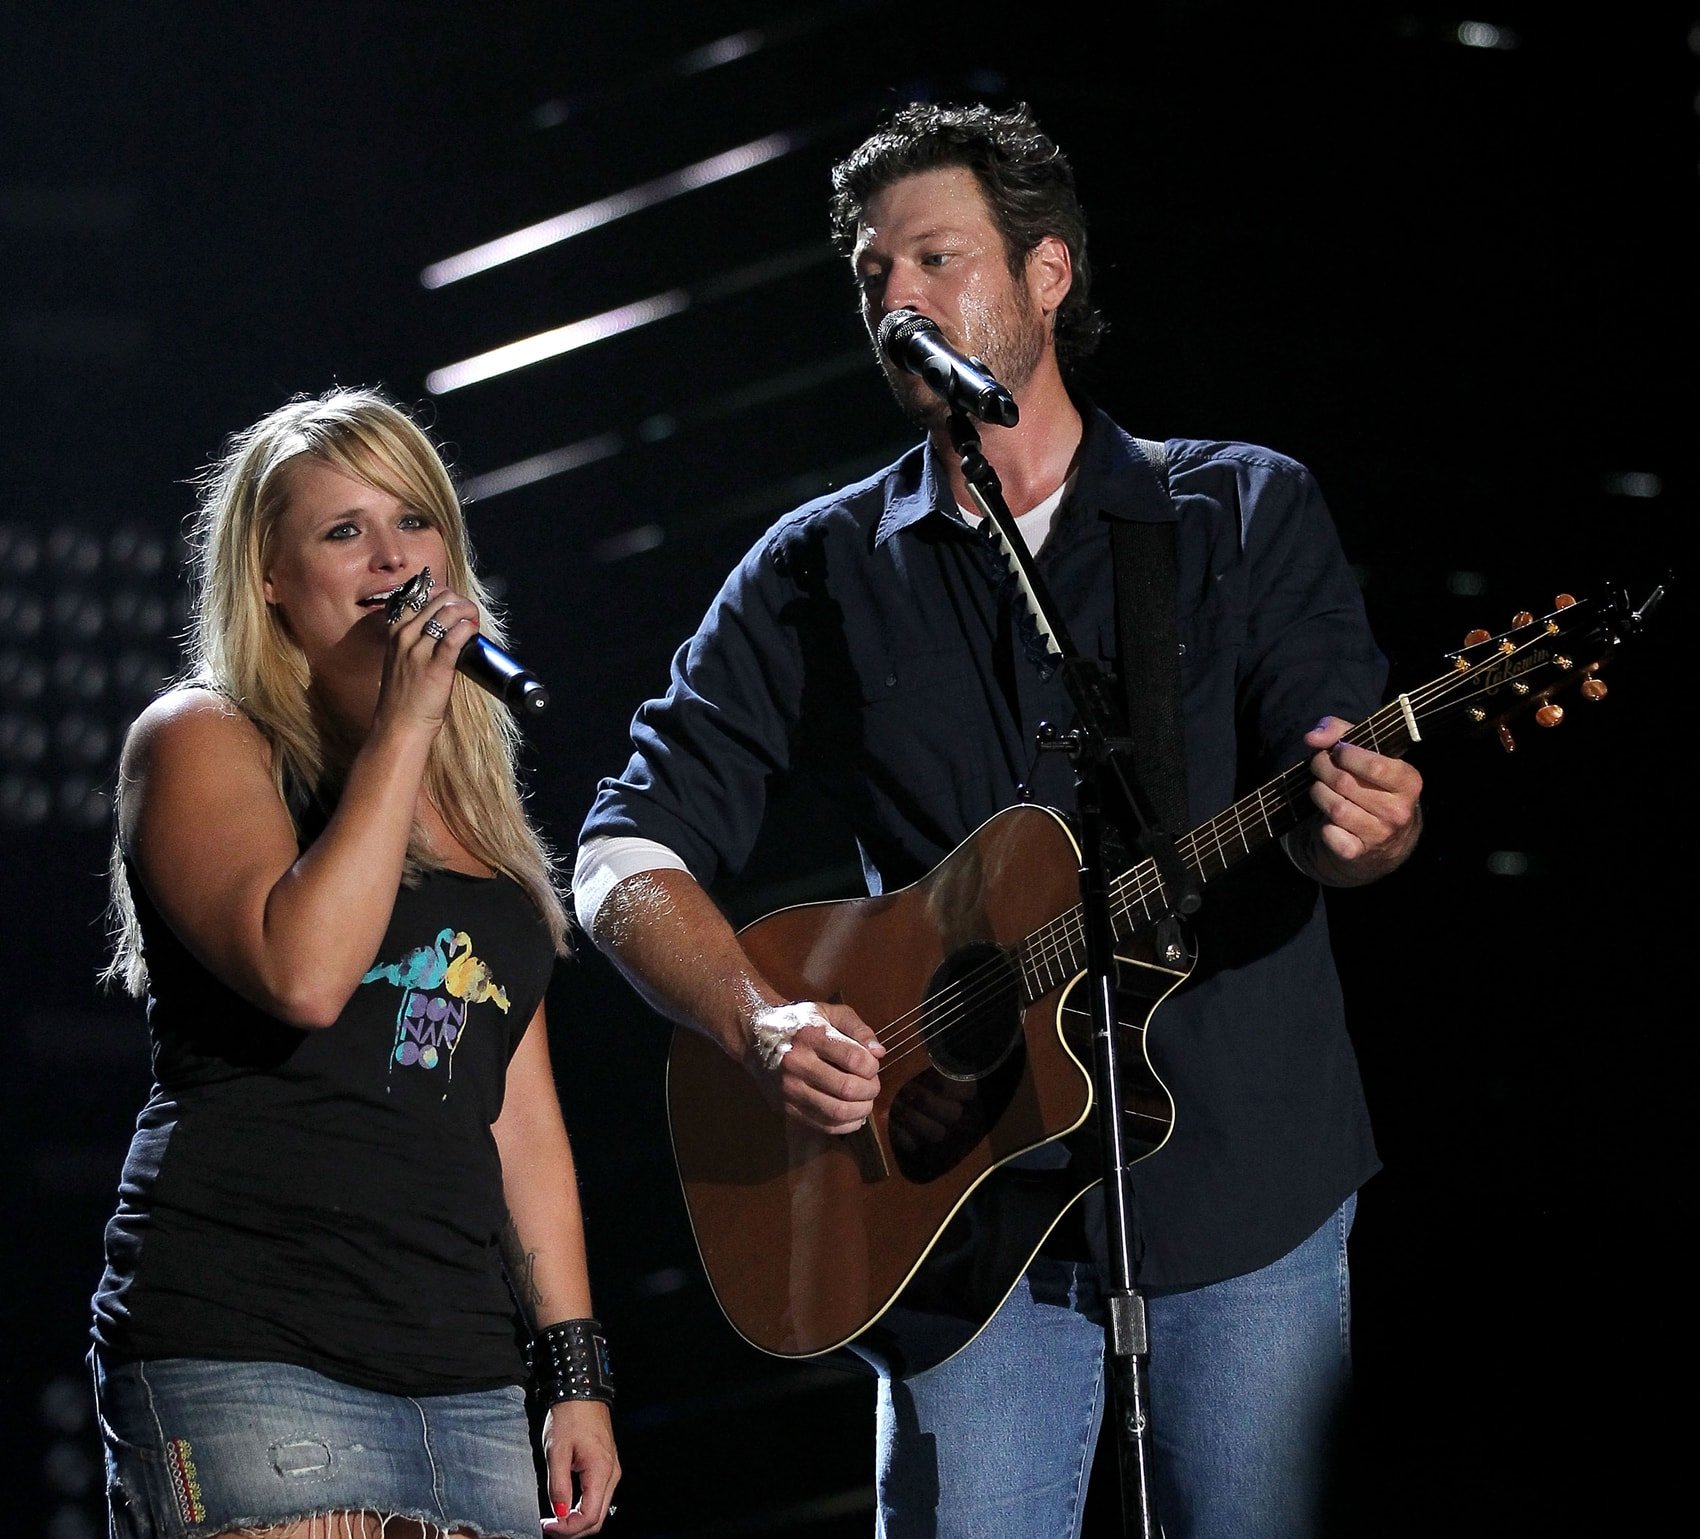 Blake Shelton and Miranda Lambert perform his version of Canadian singer Michael Bublé's hit song"Home" at the 2010 CMA Music Festival